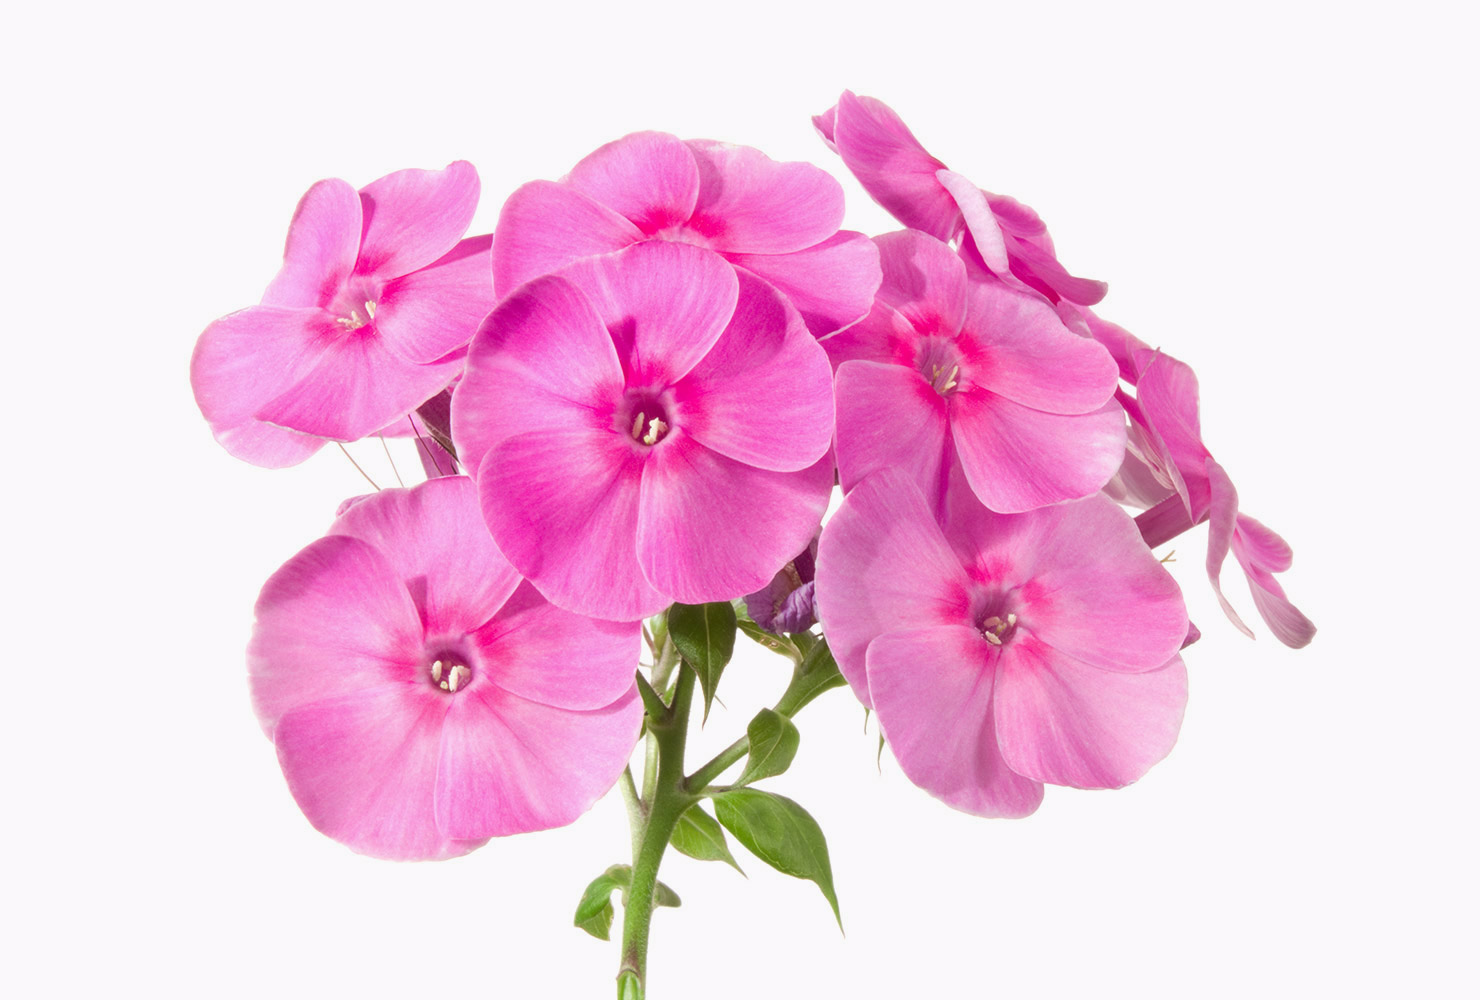 A small bouquet of pink phlox flowers. 